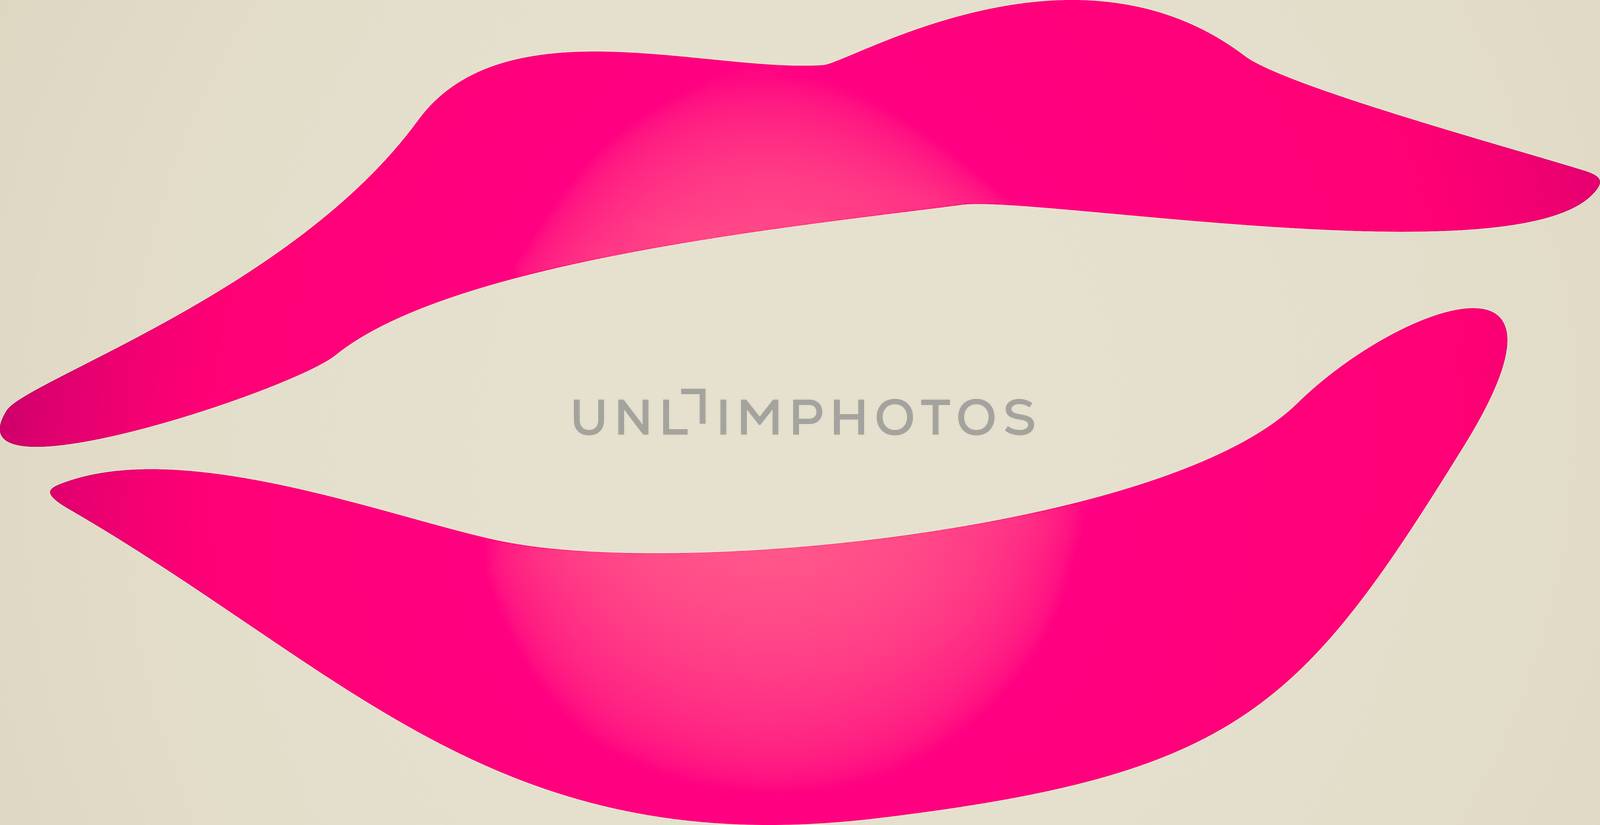 Retro looking Simple illustration of pink lipstick over white